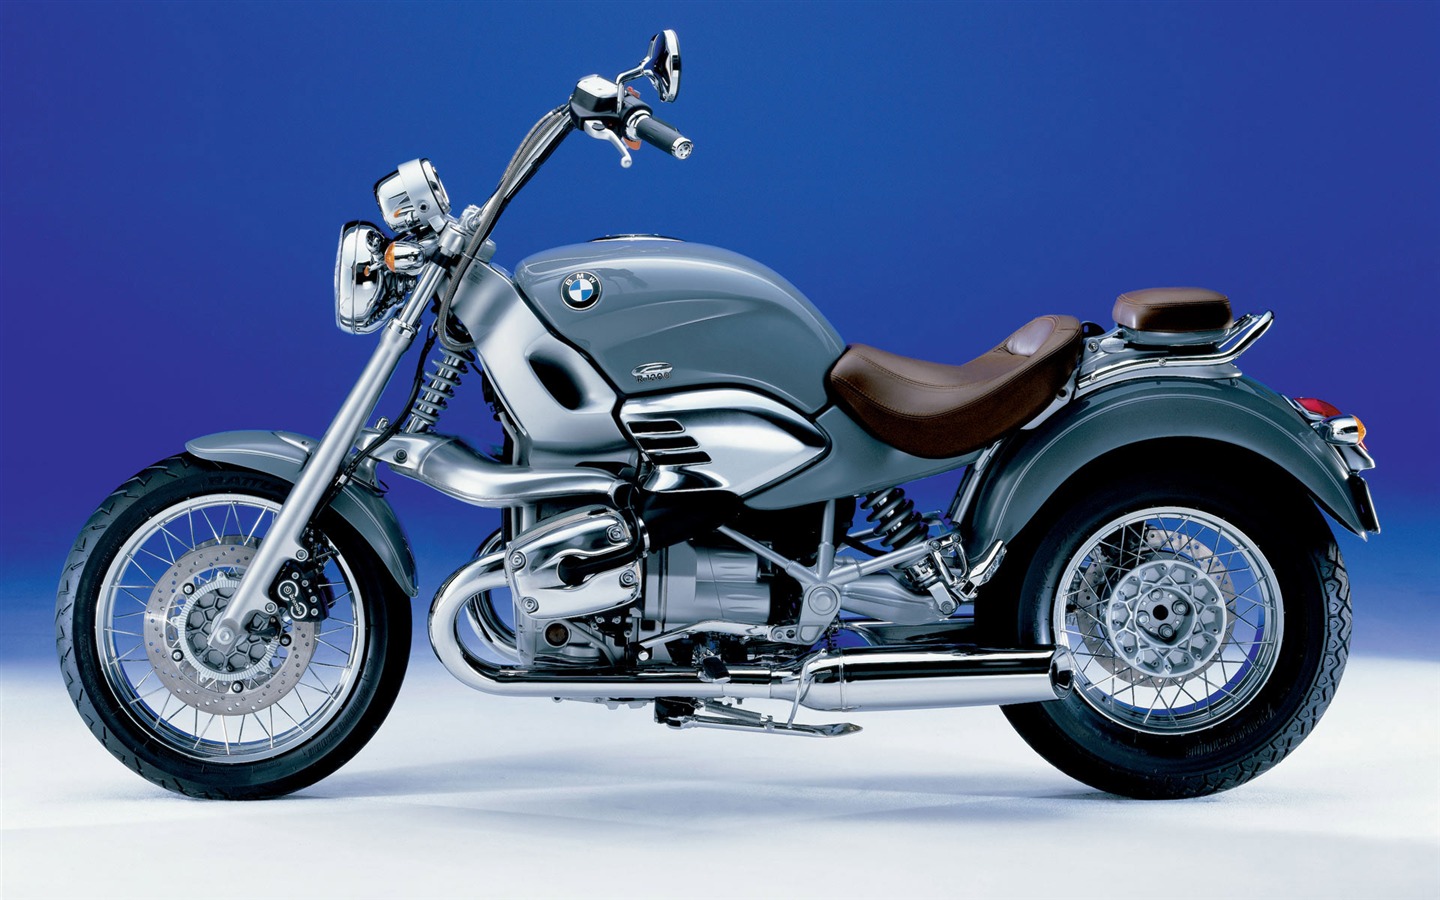 BMW motorcycle wallpapers (4) #17 - 1440x900